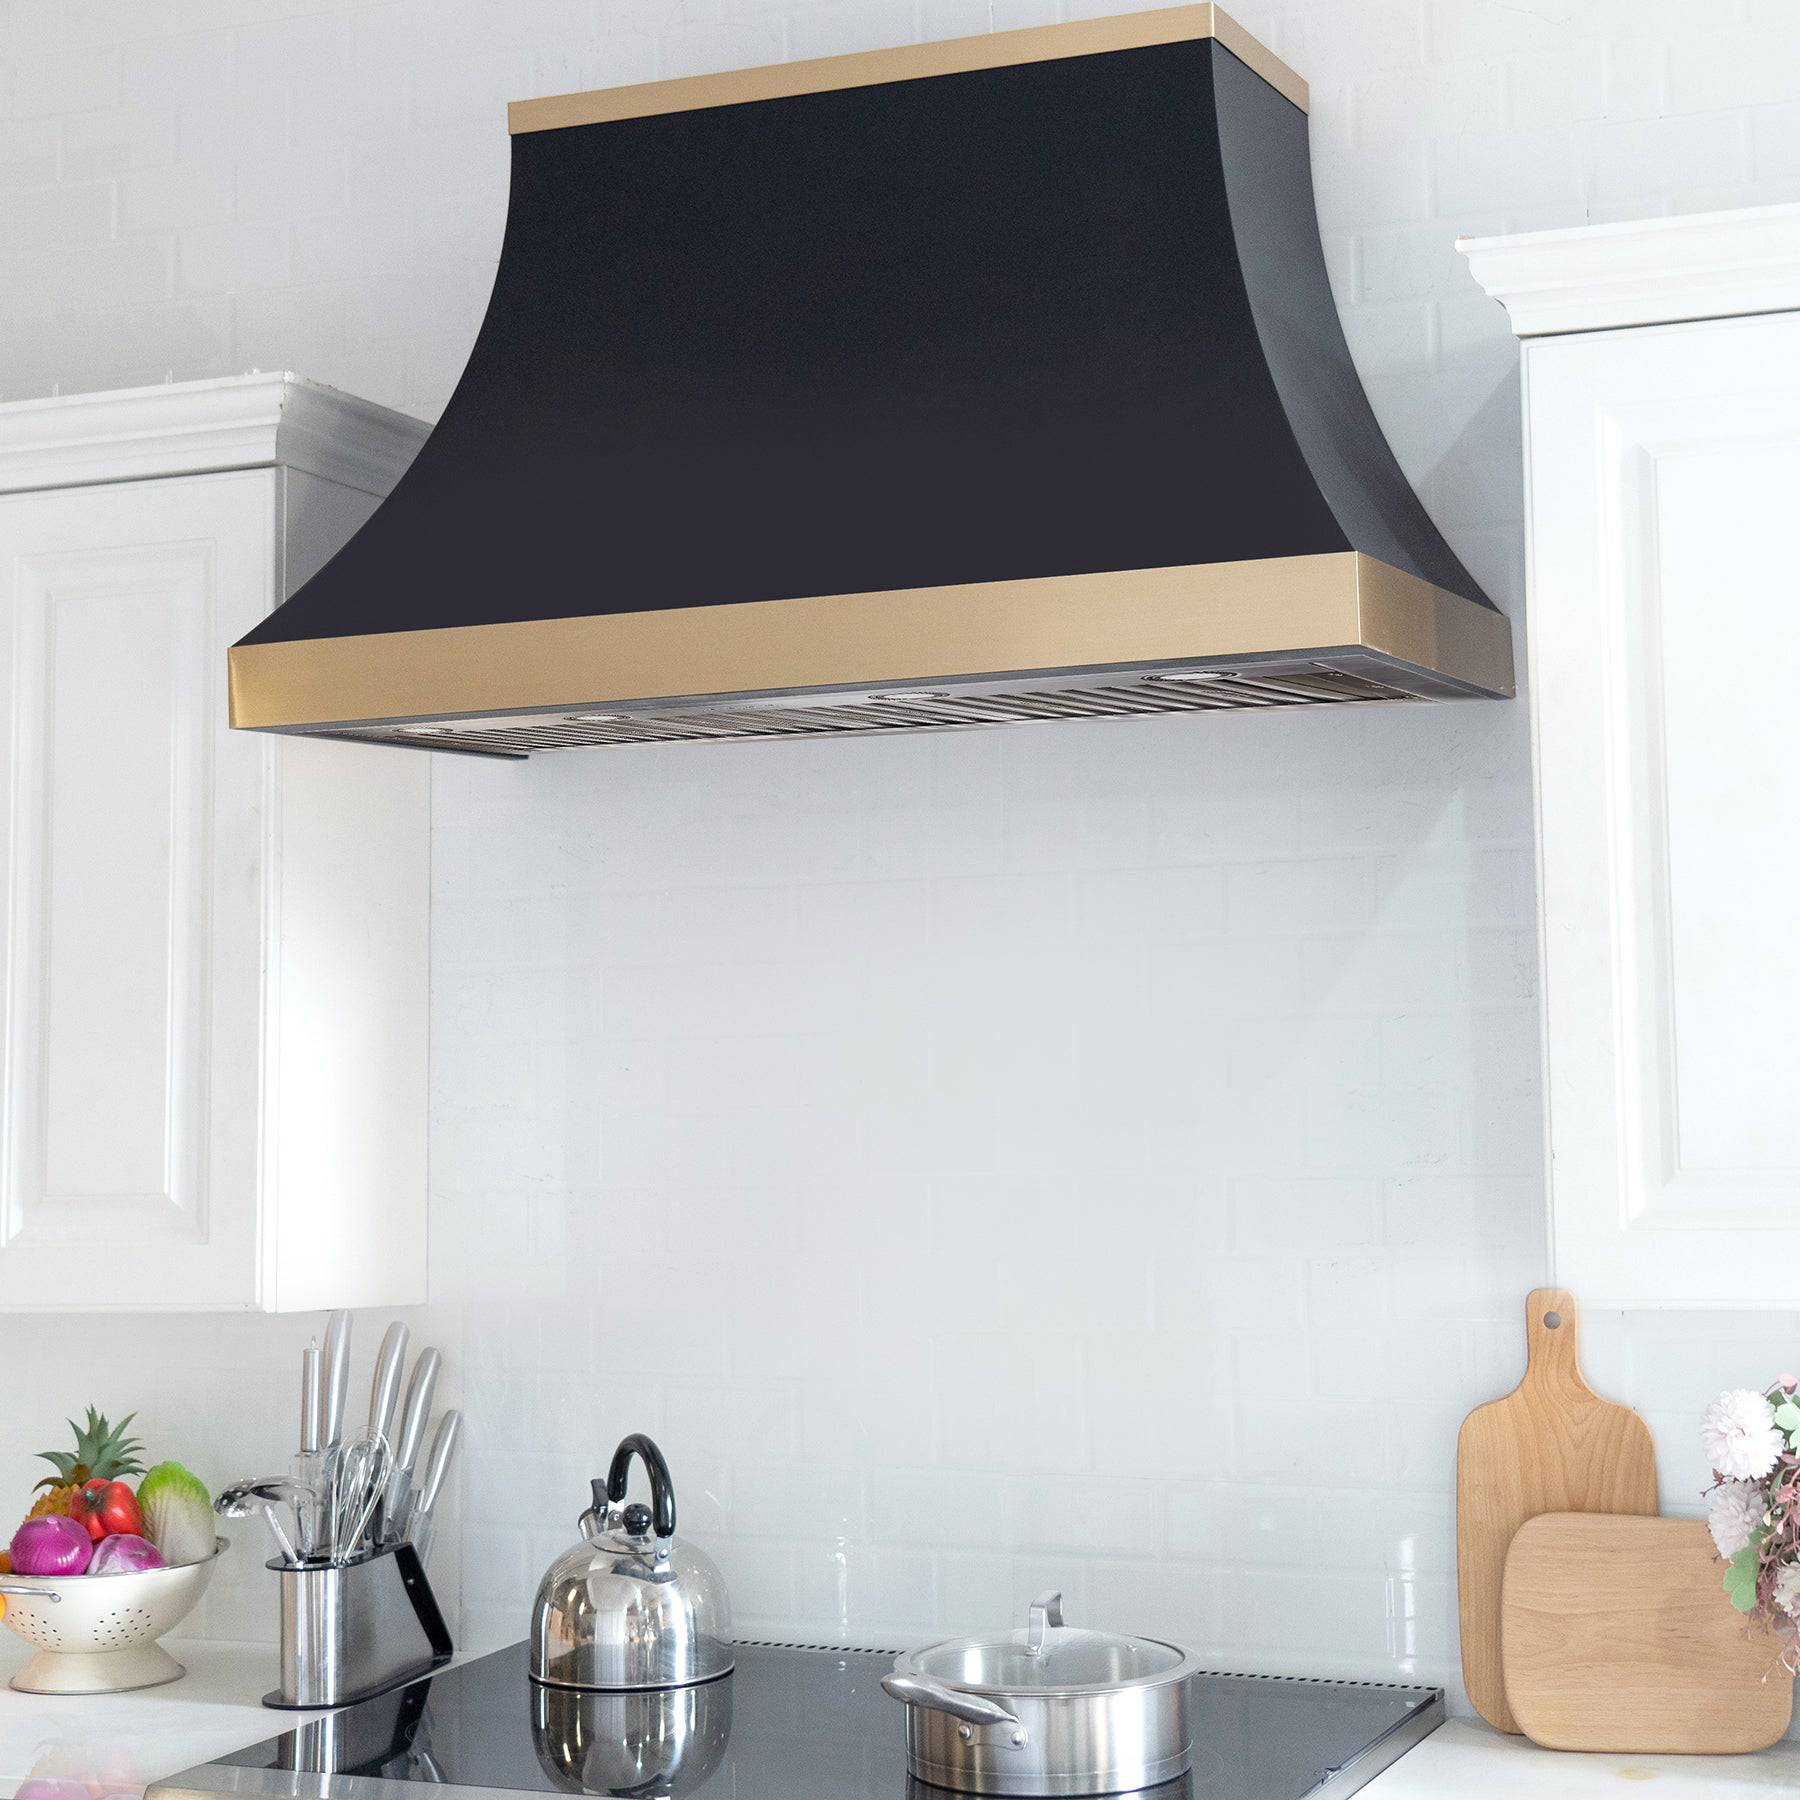 Fobest Custom Handcrafted Black Stainless Steel Range Hood FSS-119 - Stainless Steel Range Hood-Fobest Appliance